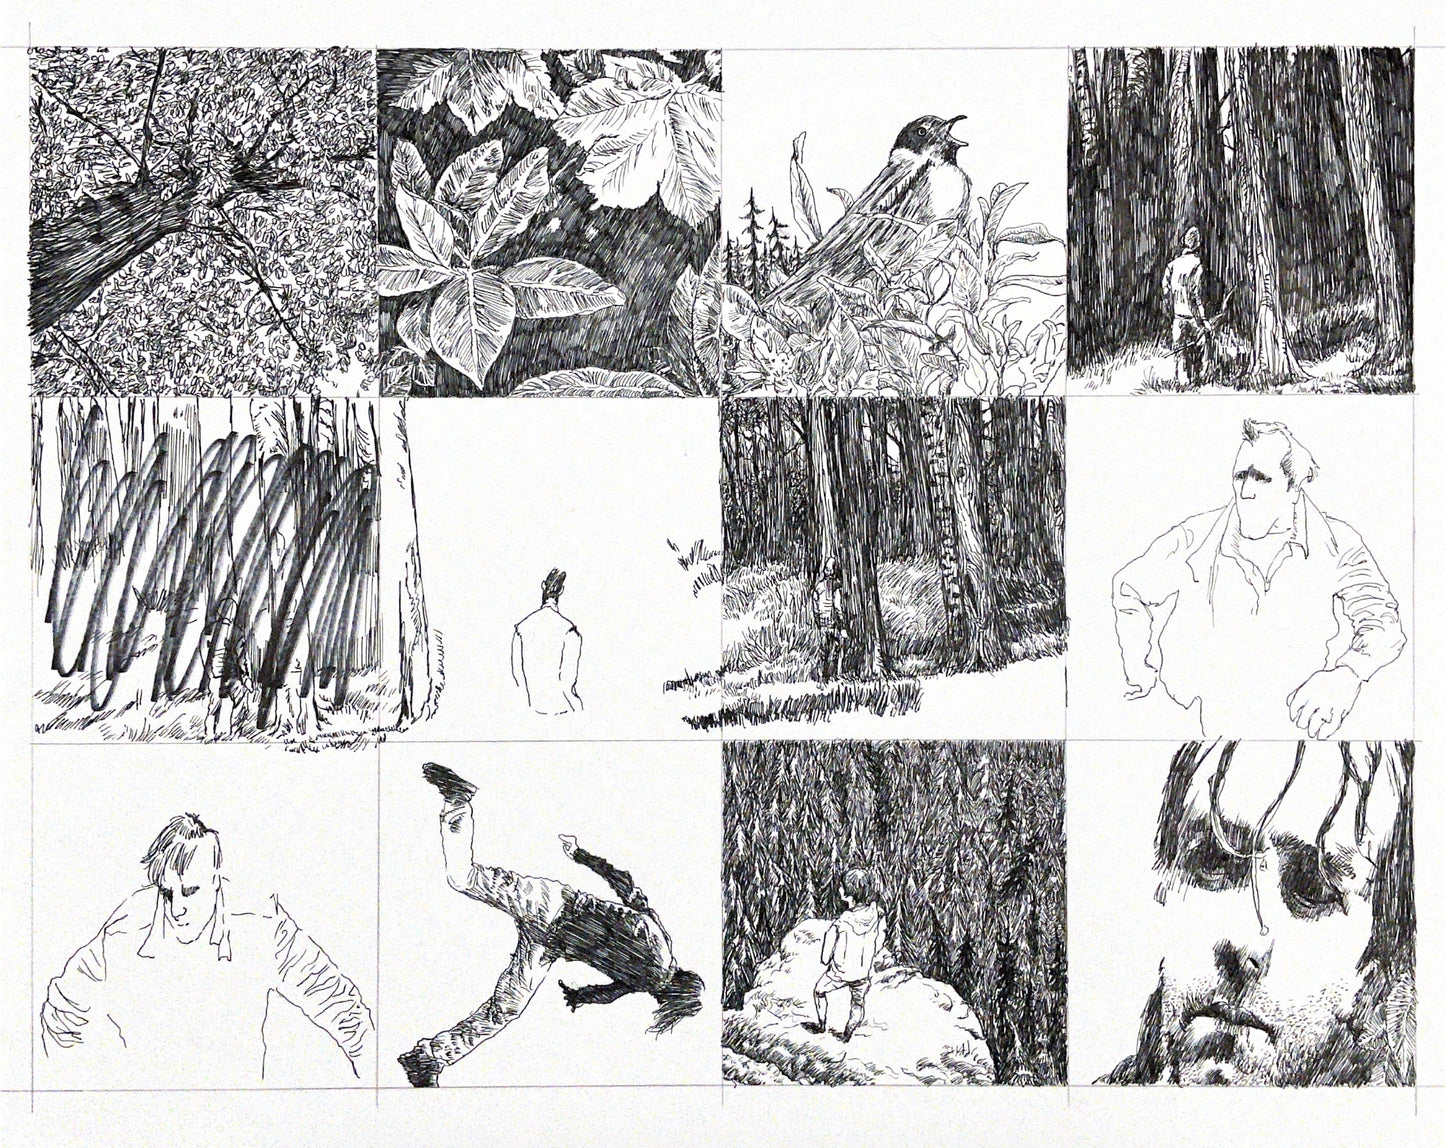 Graphic novel panels, featuring ink drawings, people, woods and movement.